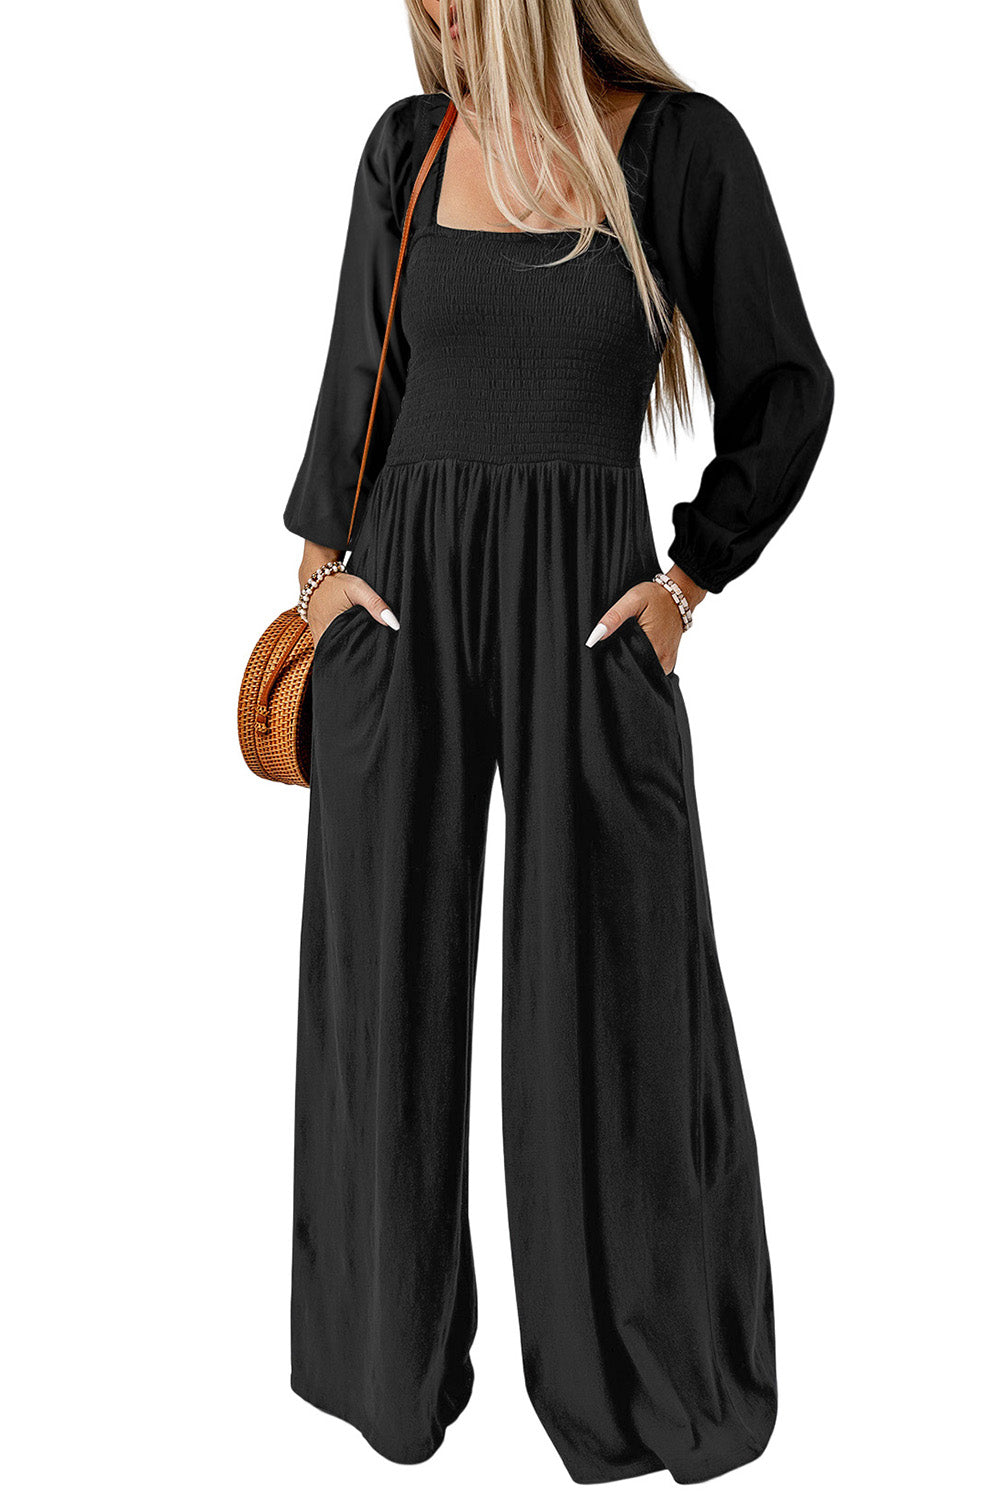 Savvi Jumpsuit-SHIPS DIRECTLY TO YOU!